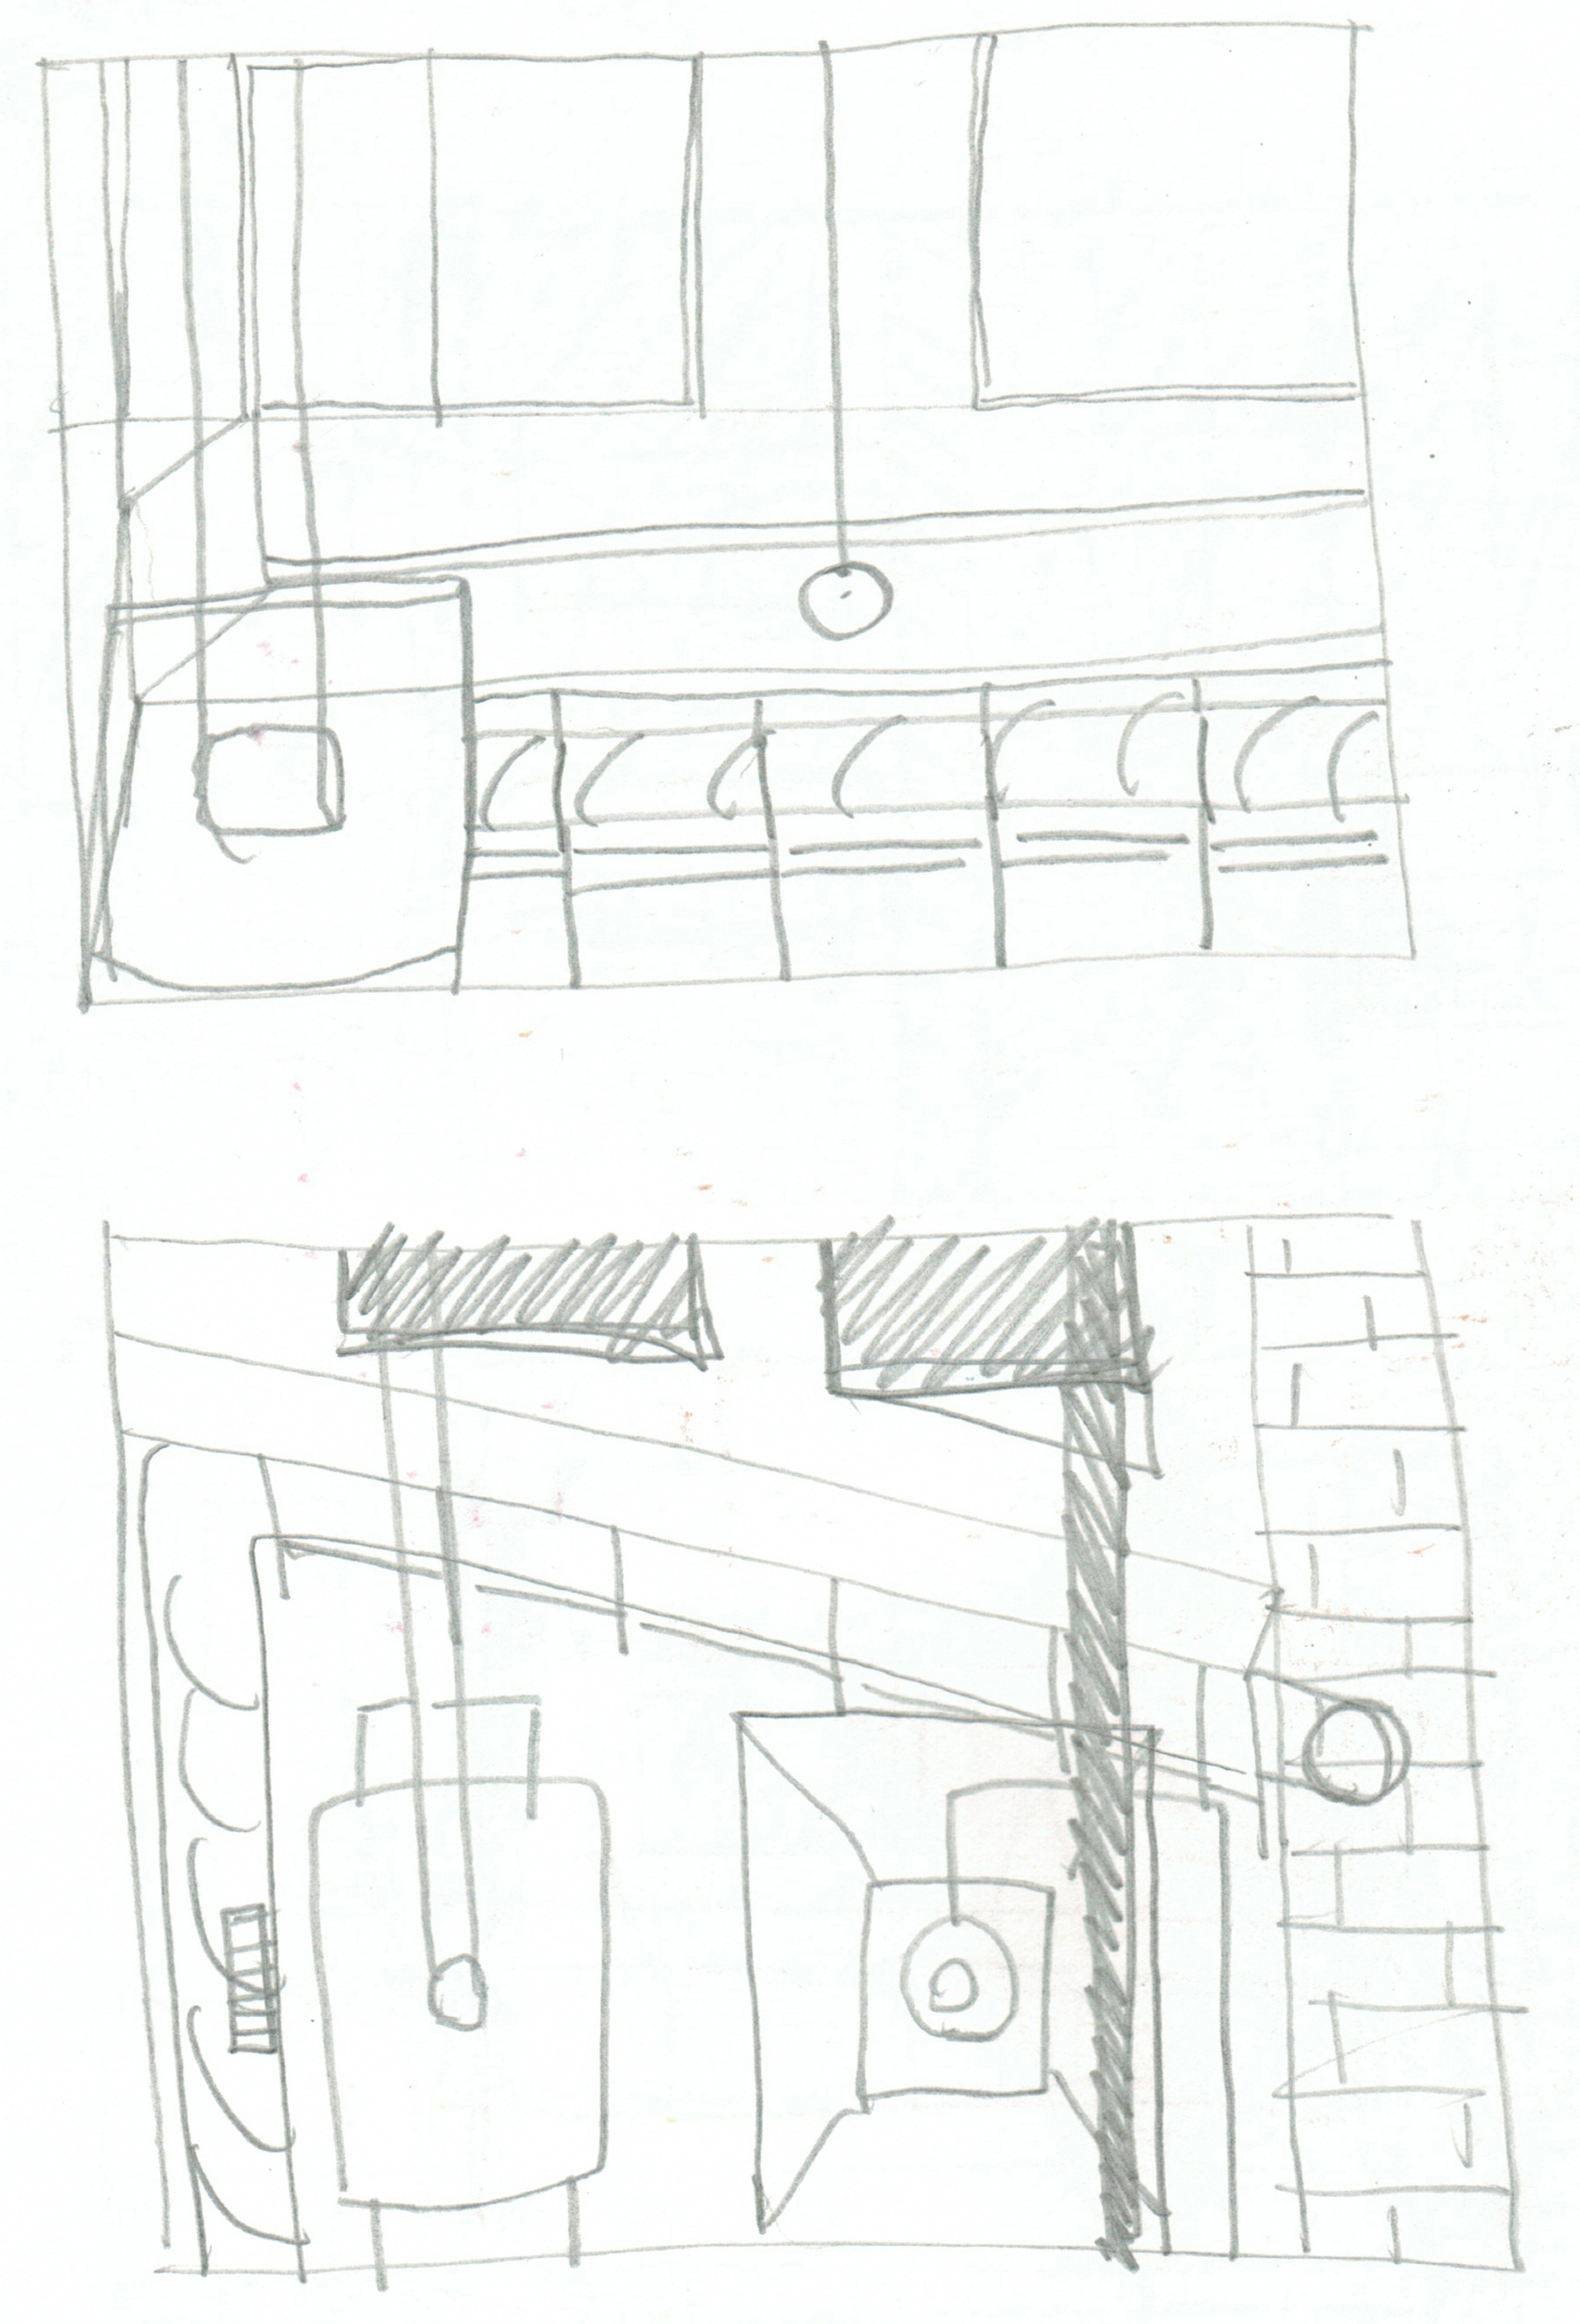 two pencil sketches of room interiors